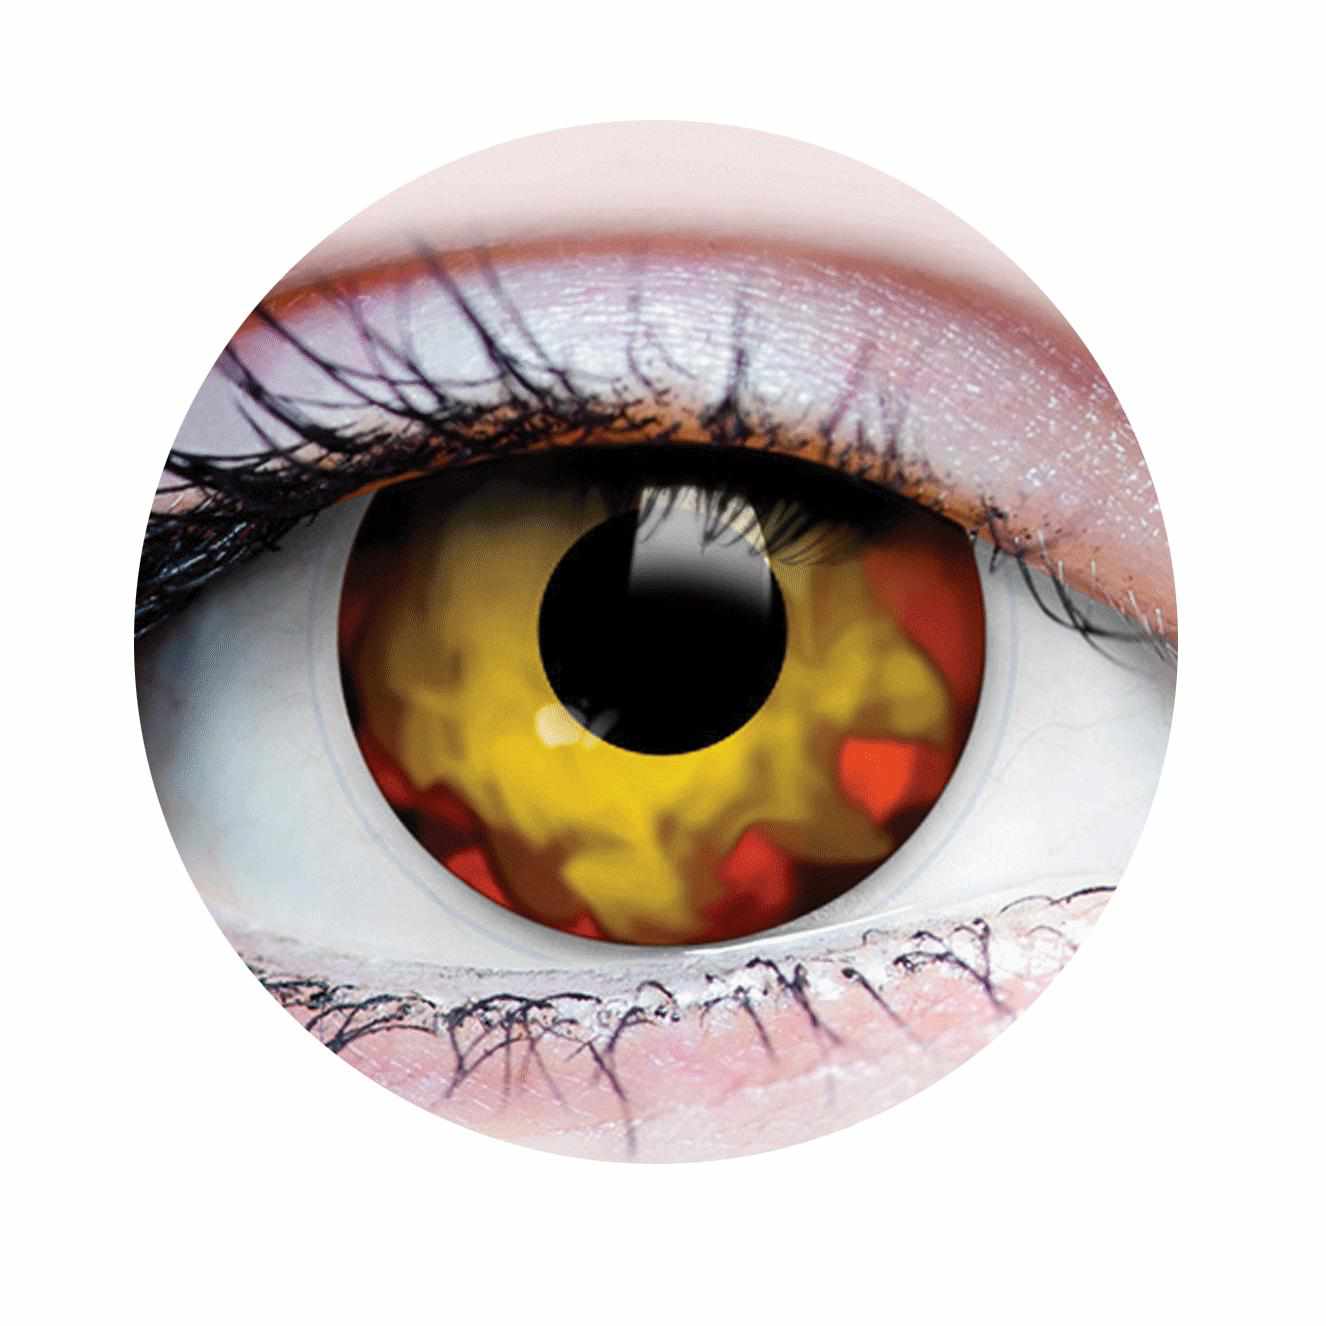 Green Cat Eye Halloween Contacts - Colored Contact Lenses